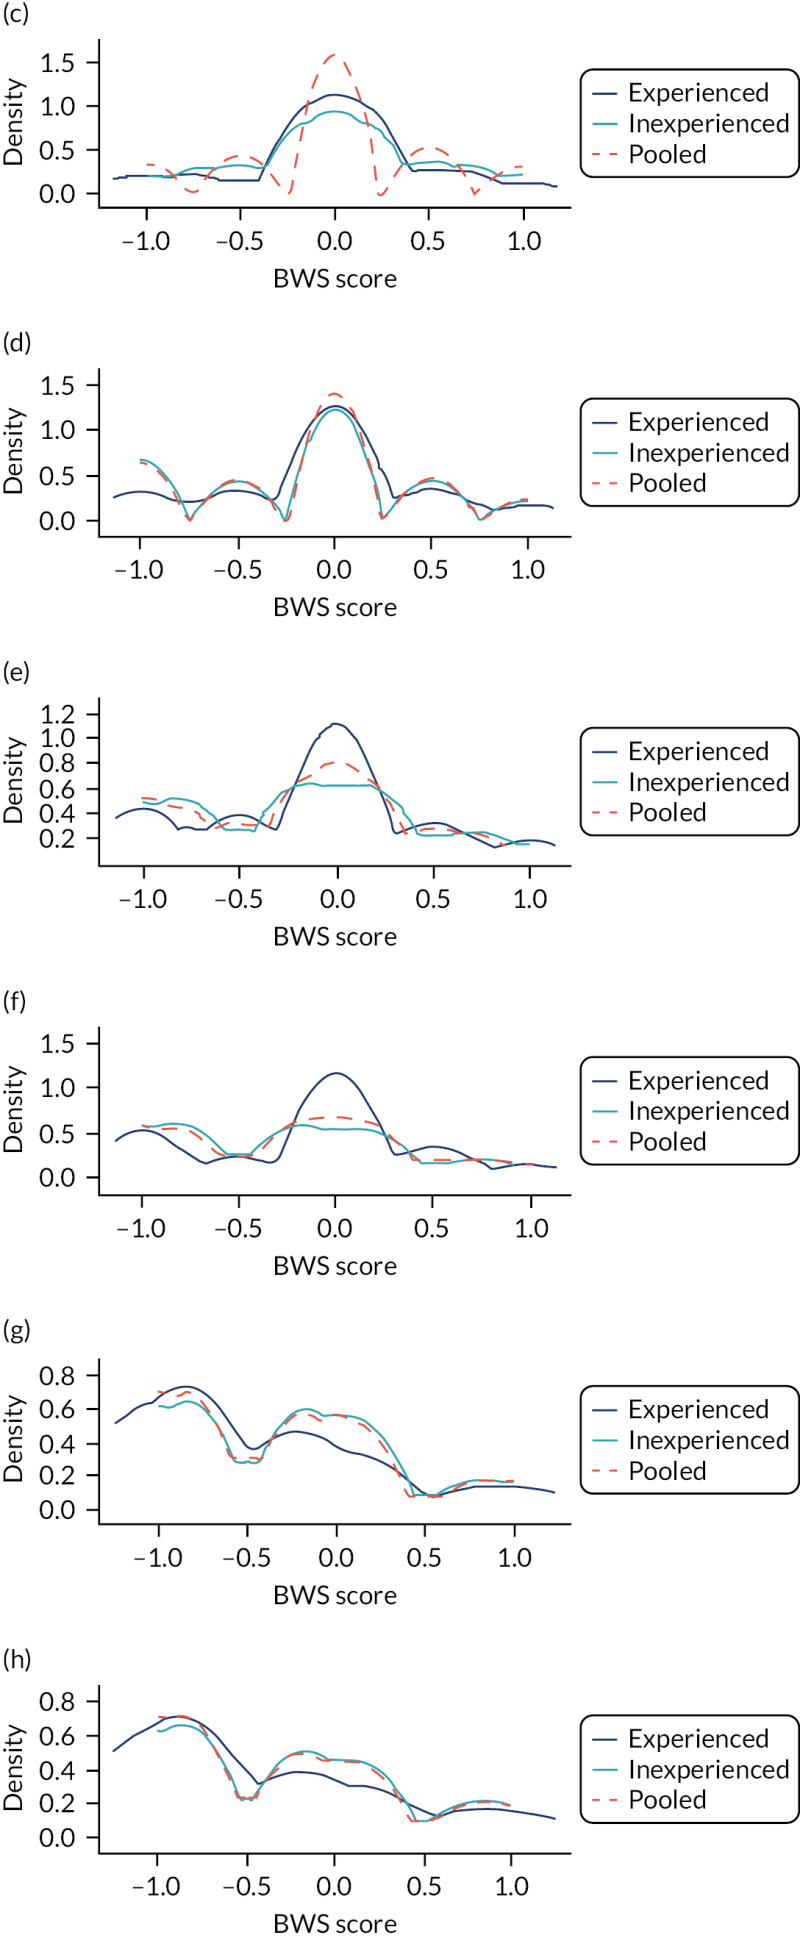 FIGURE 35. Kernel density plots showing distribution of BWS responses stratified by question context and respondent type: bisphosphonates.